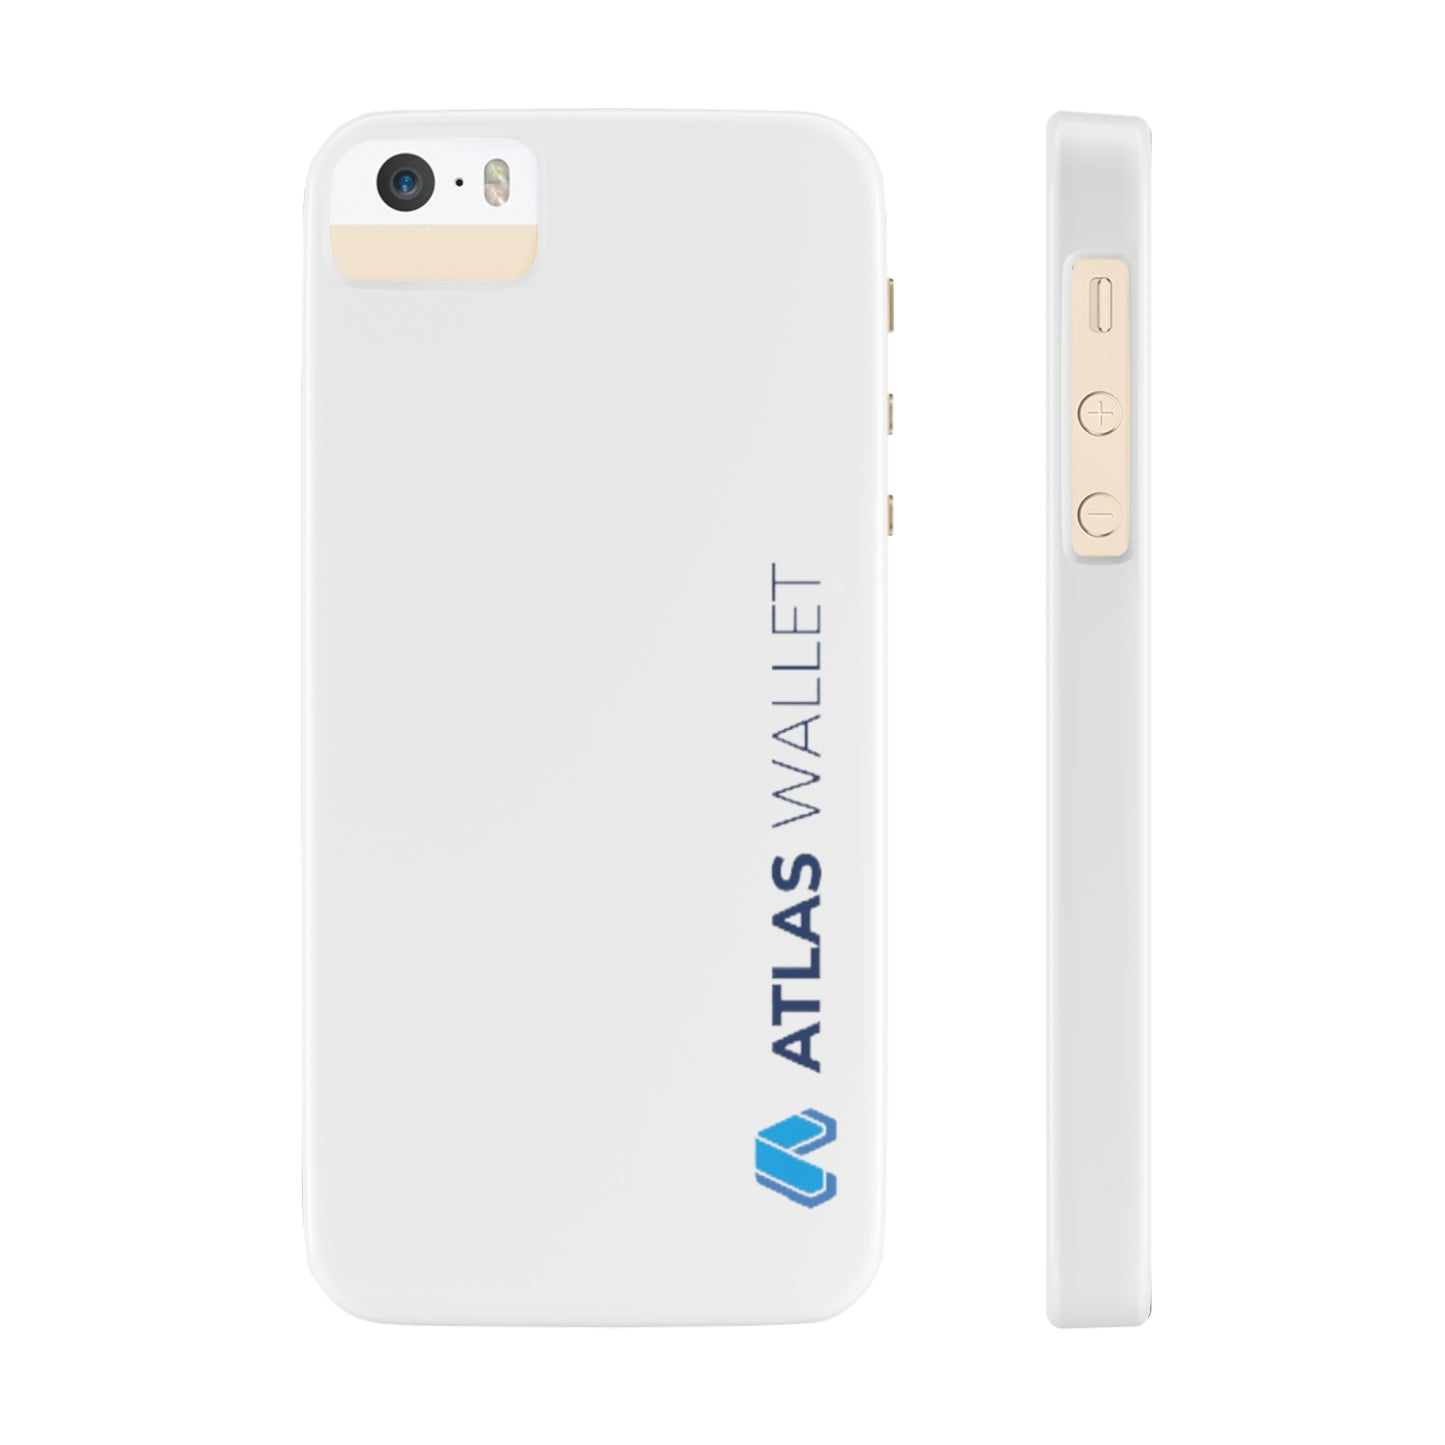 Slim Phone Cases, Case-Mate - Atlas Wallet with logo